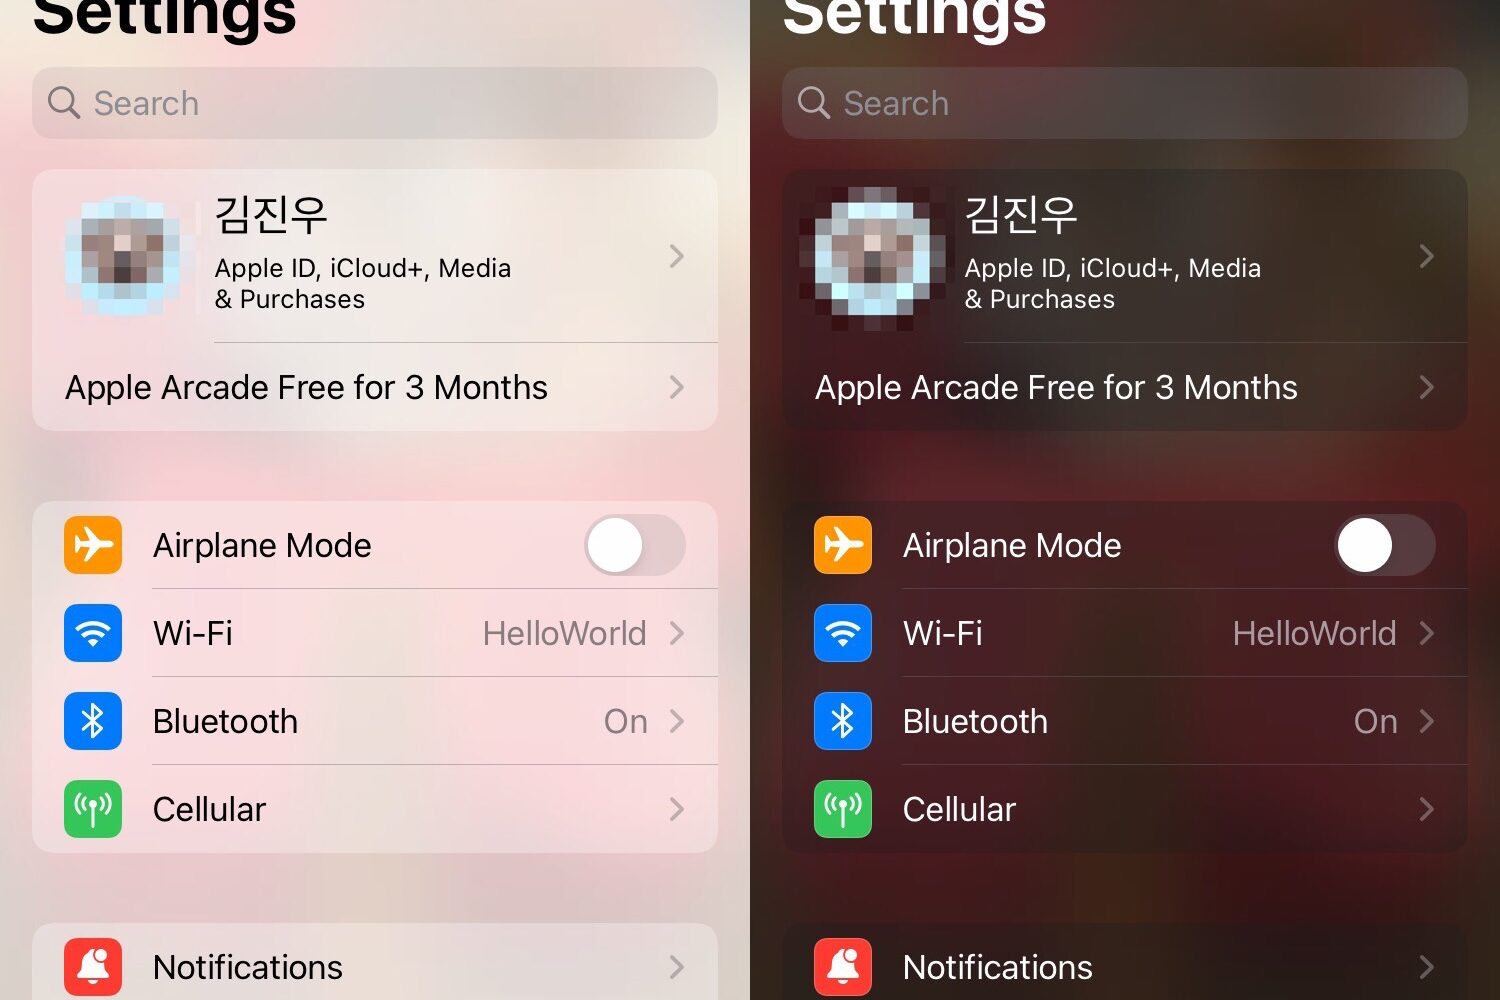 BlurredPreferences blurs the background of the Settings app.